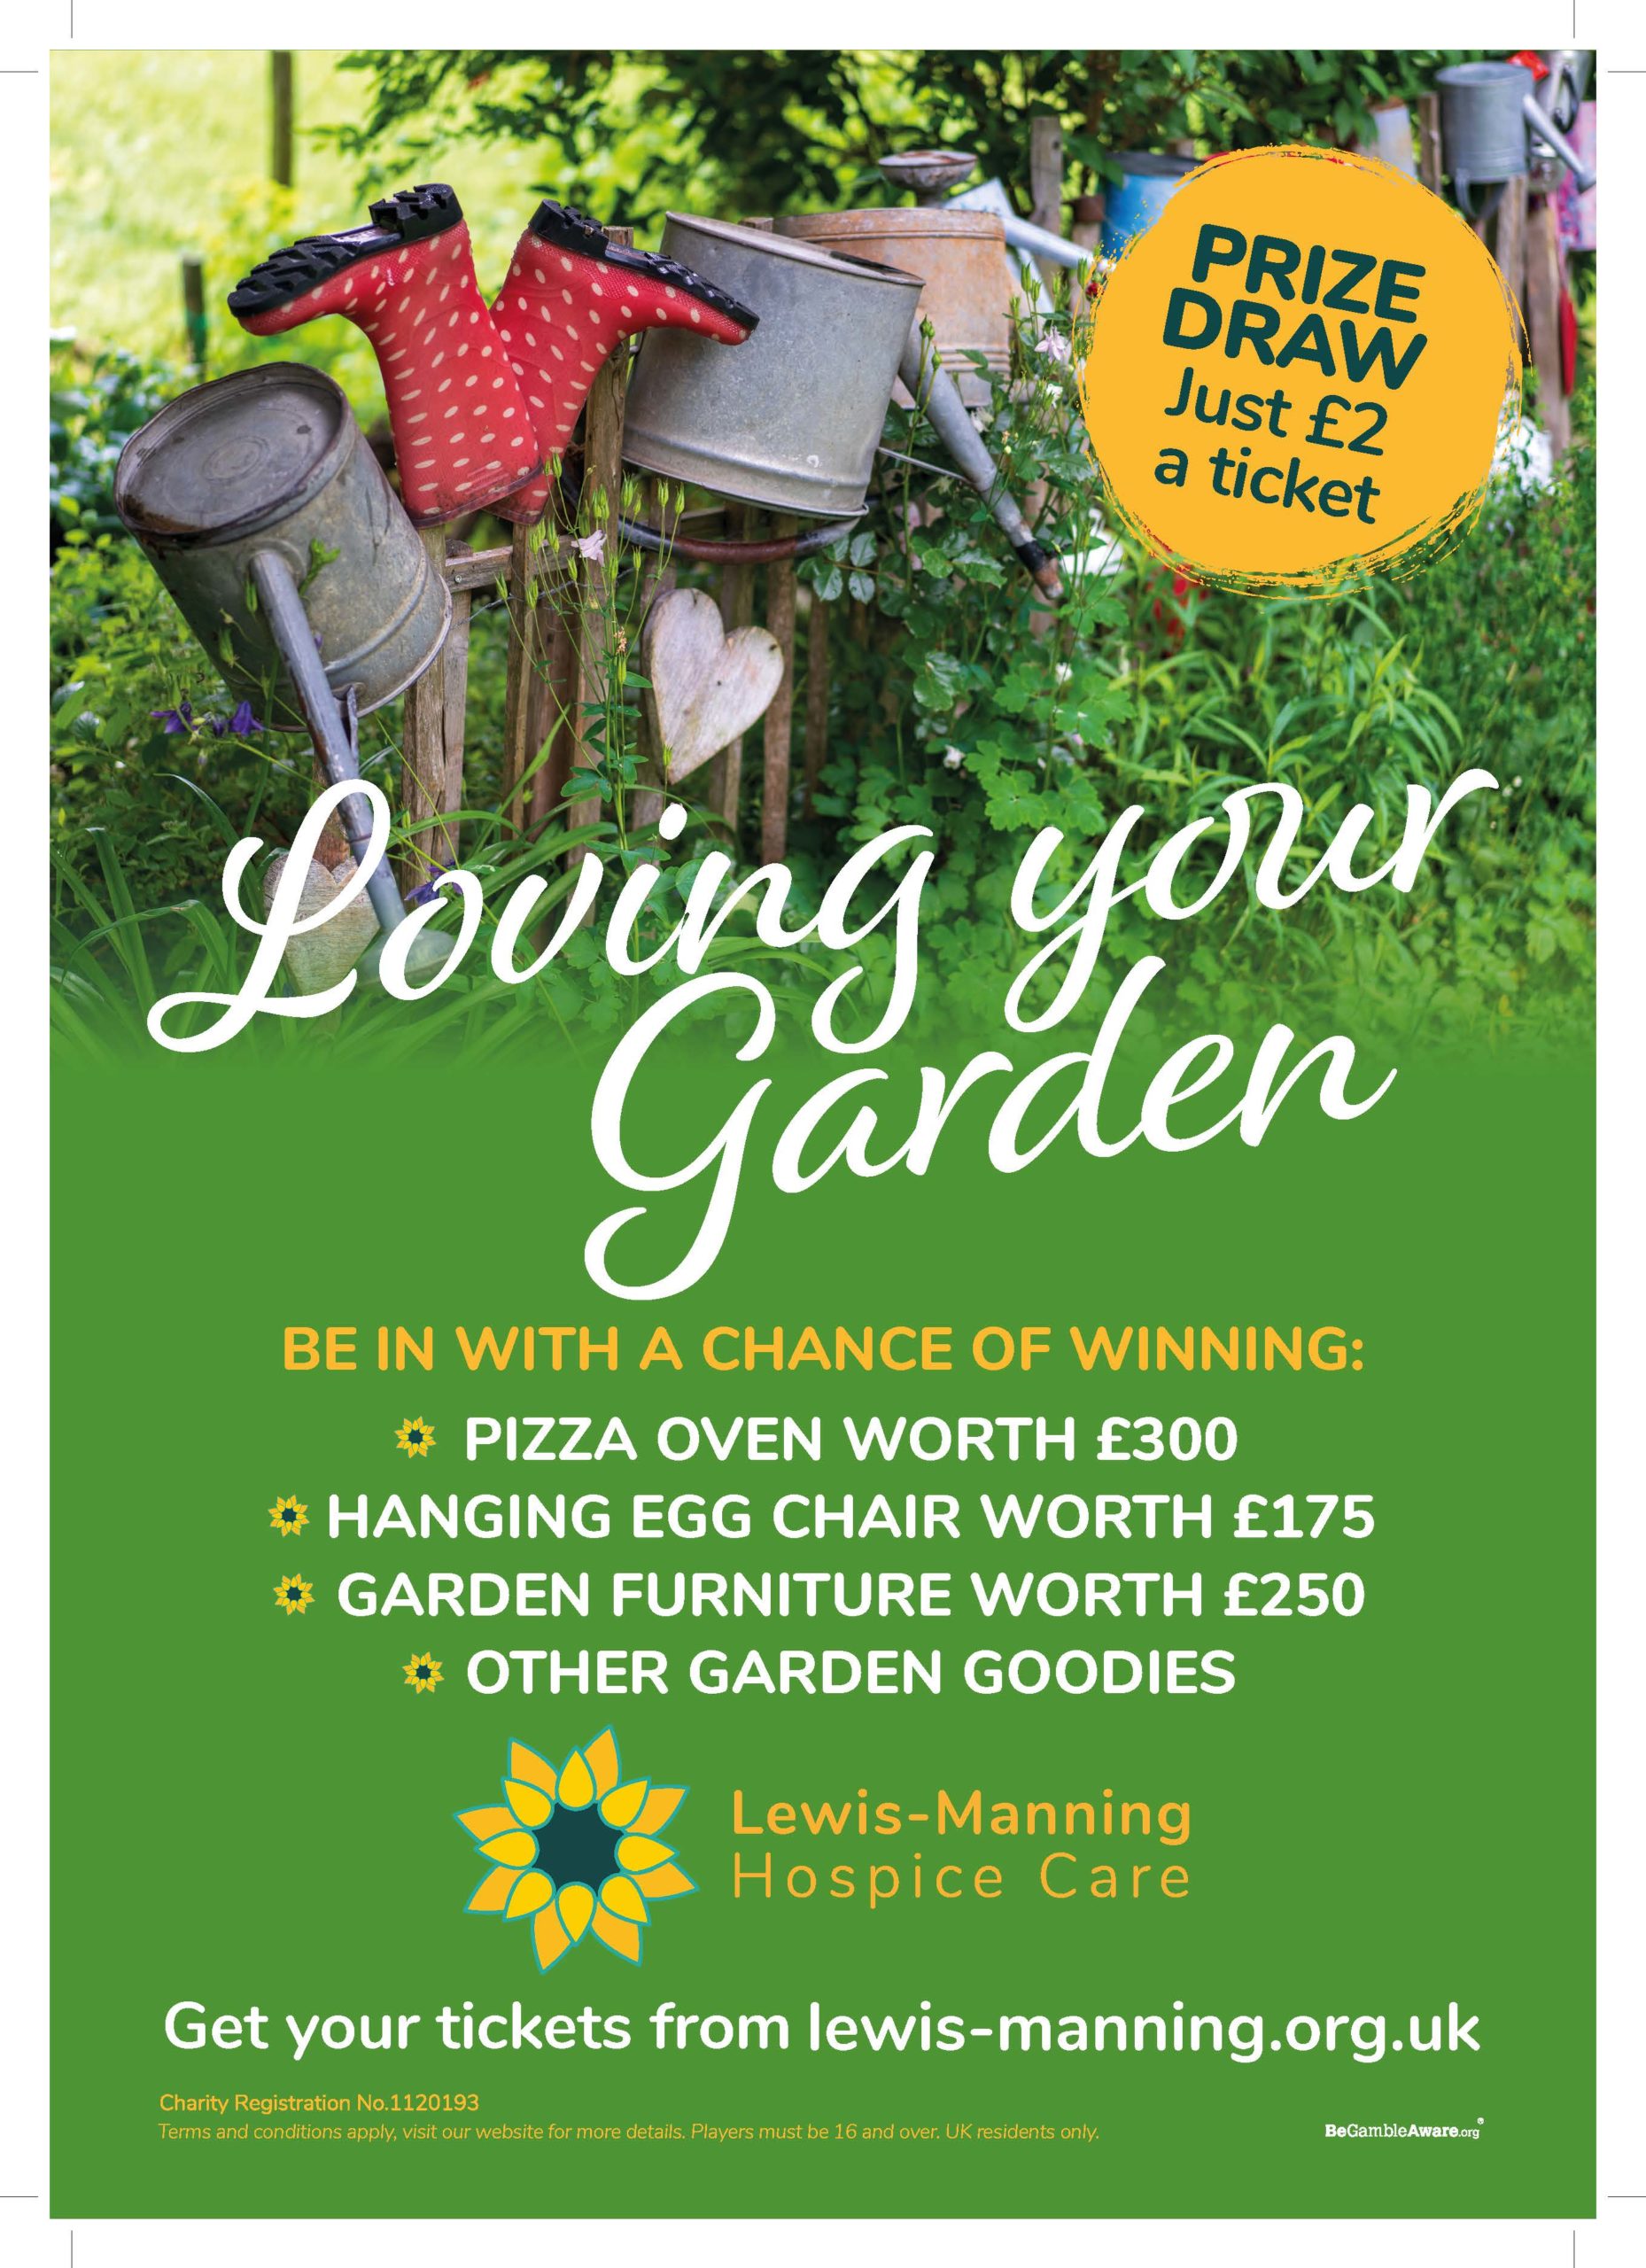 Lewis- Manning Hospice Care launches ‘Loving Your Garden’ campaign and partners with Dorset horticulturist David Hurrion